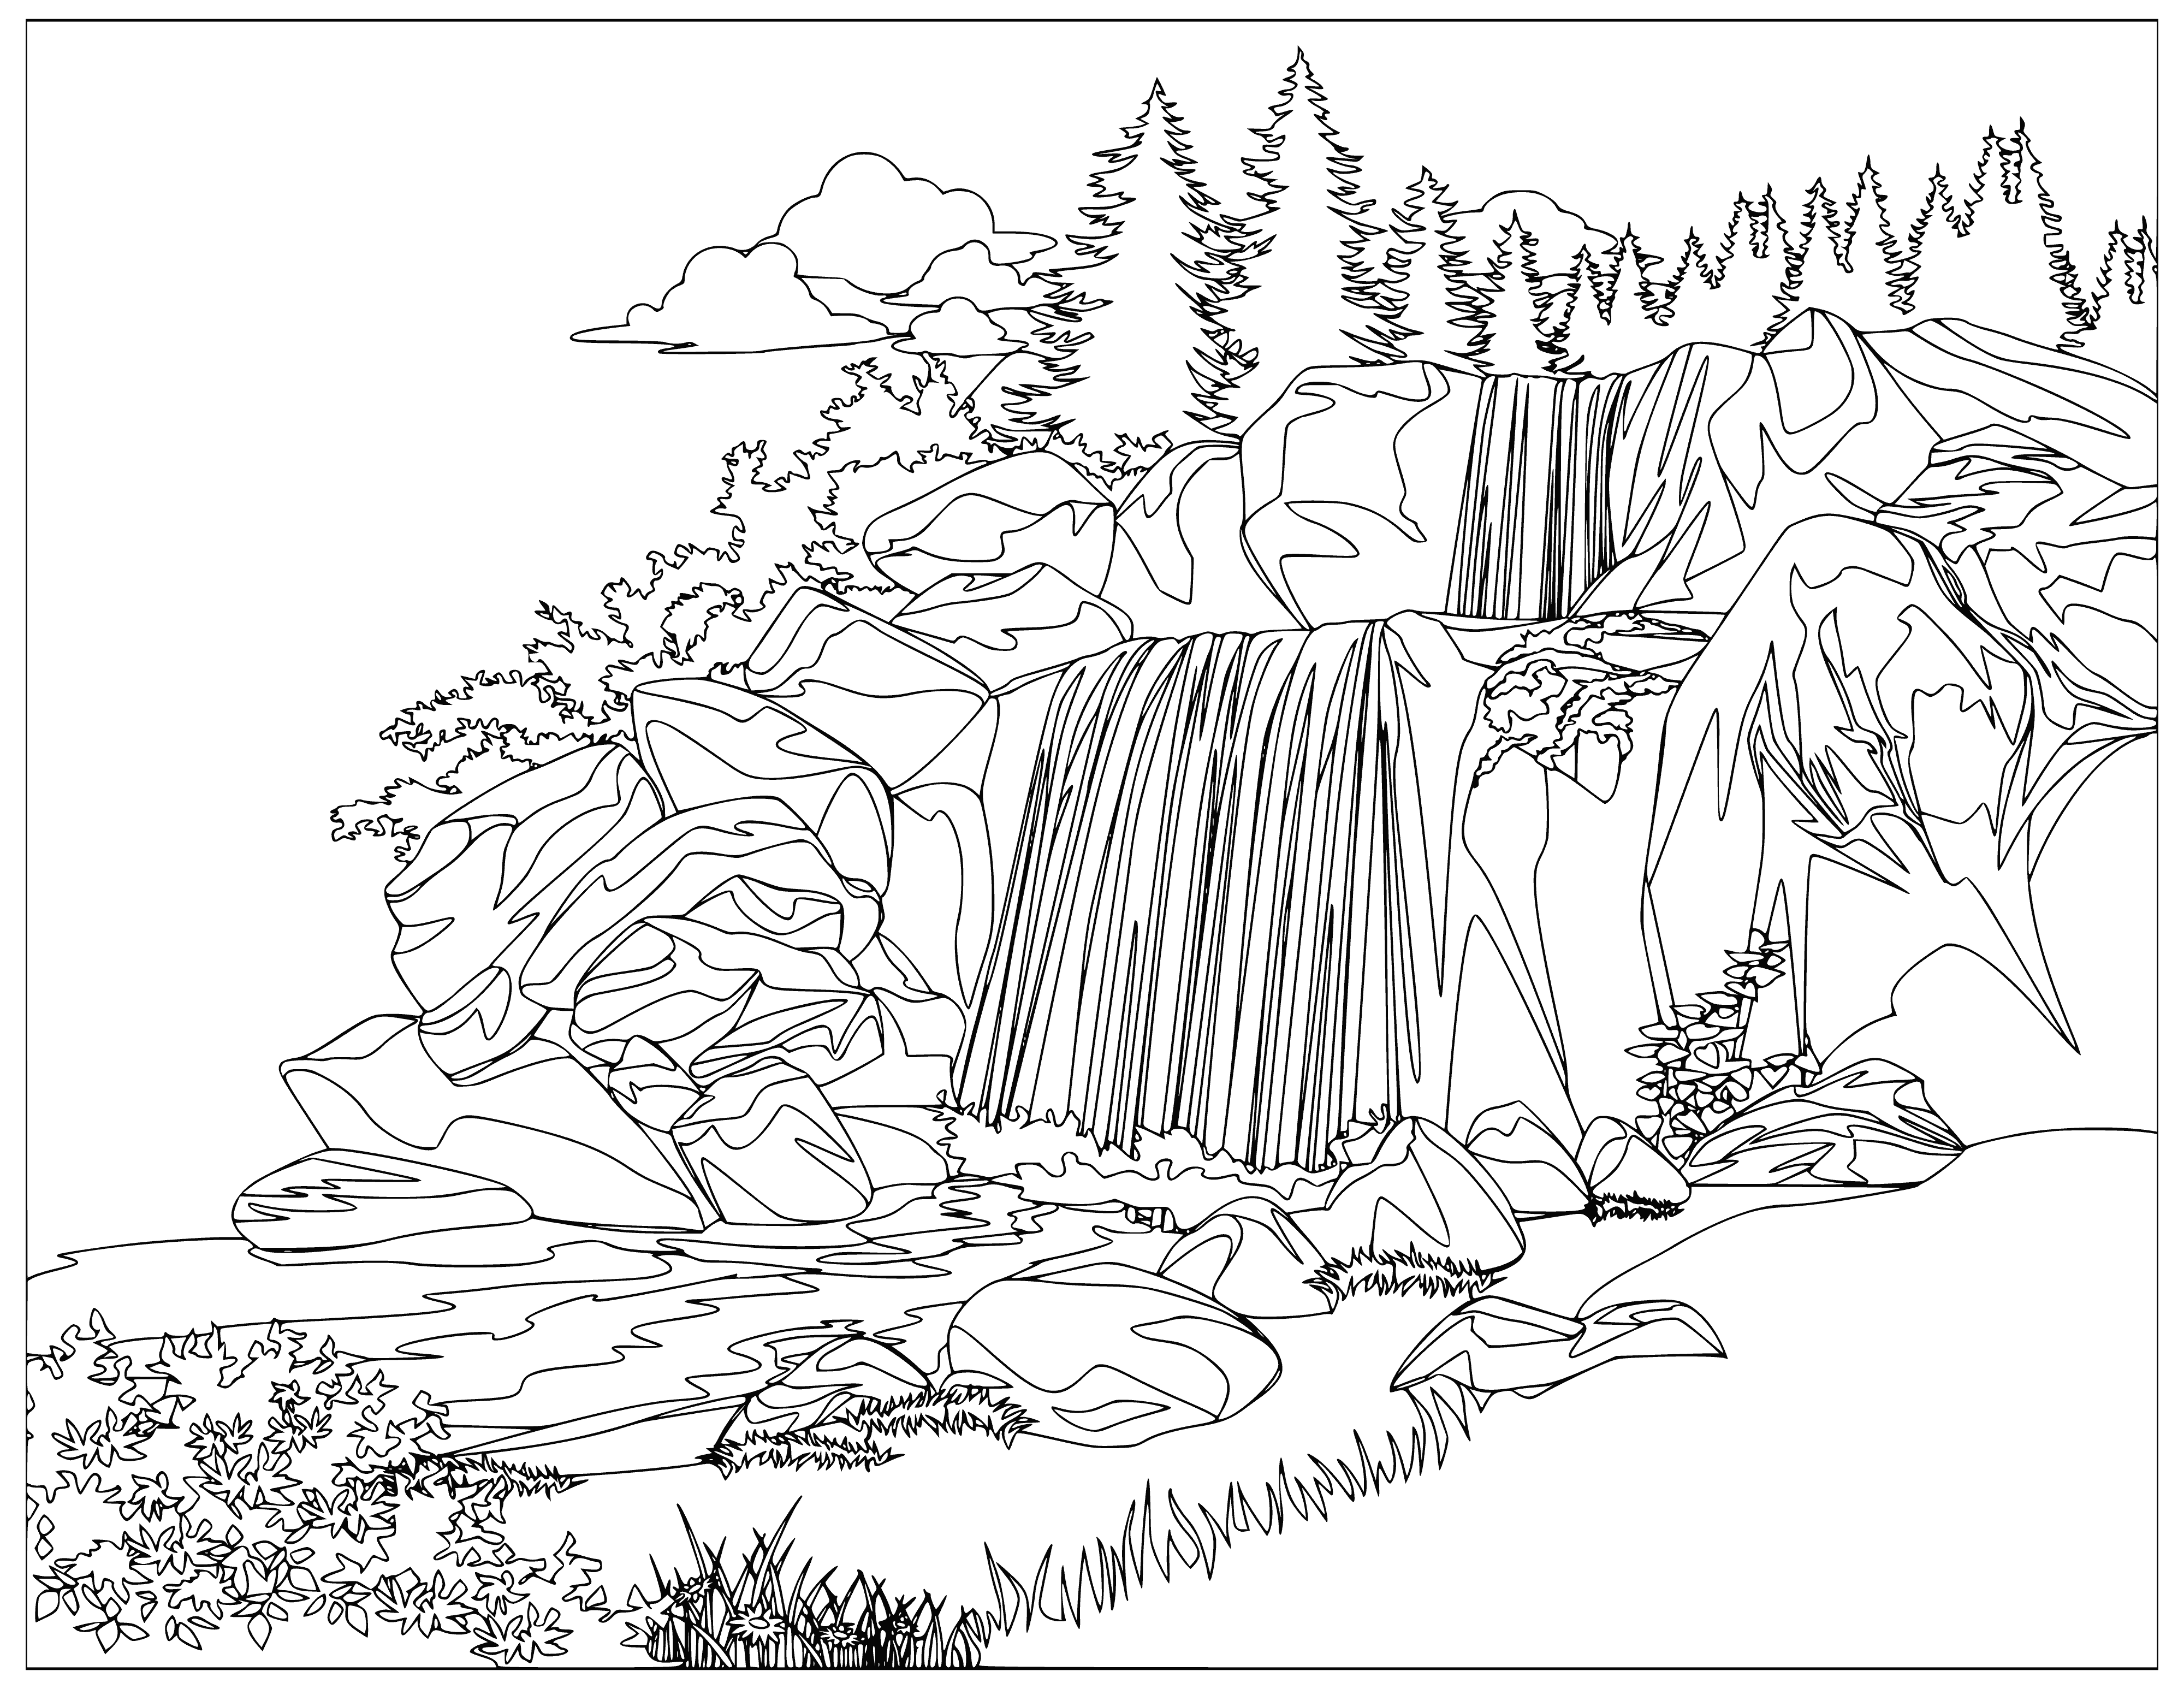 Mountain waterfall coloring page